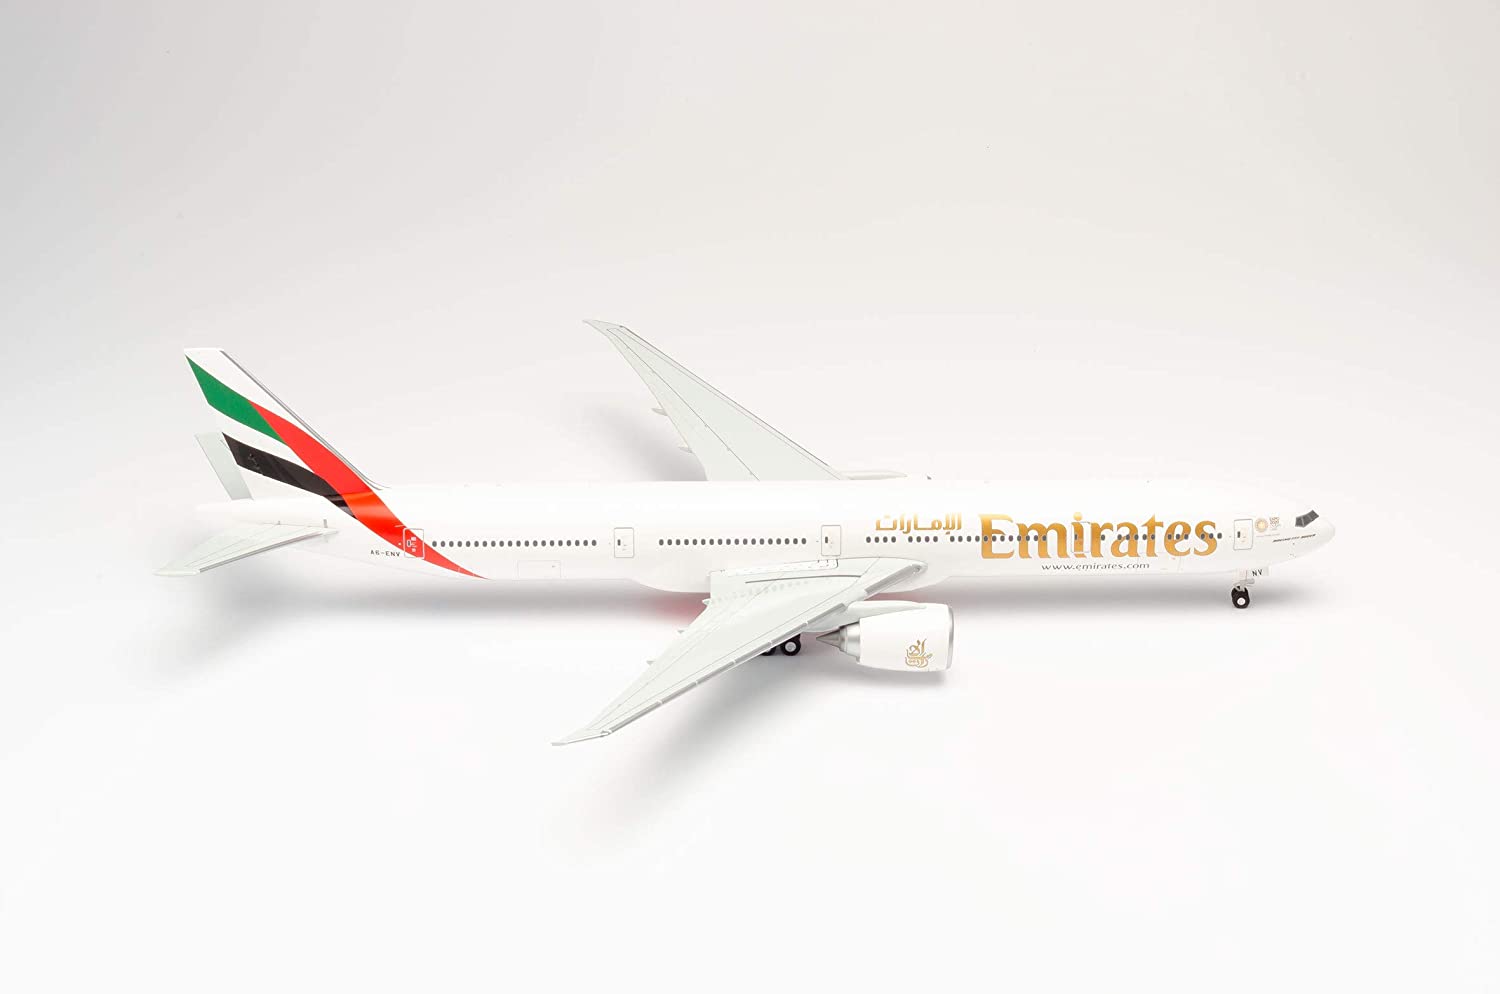 Herpa Miniature Model 557467 Emirates Boeing 777-300Er In Miniature For Col